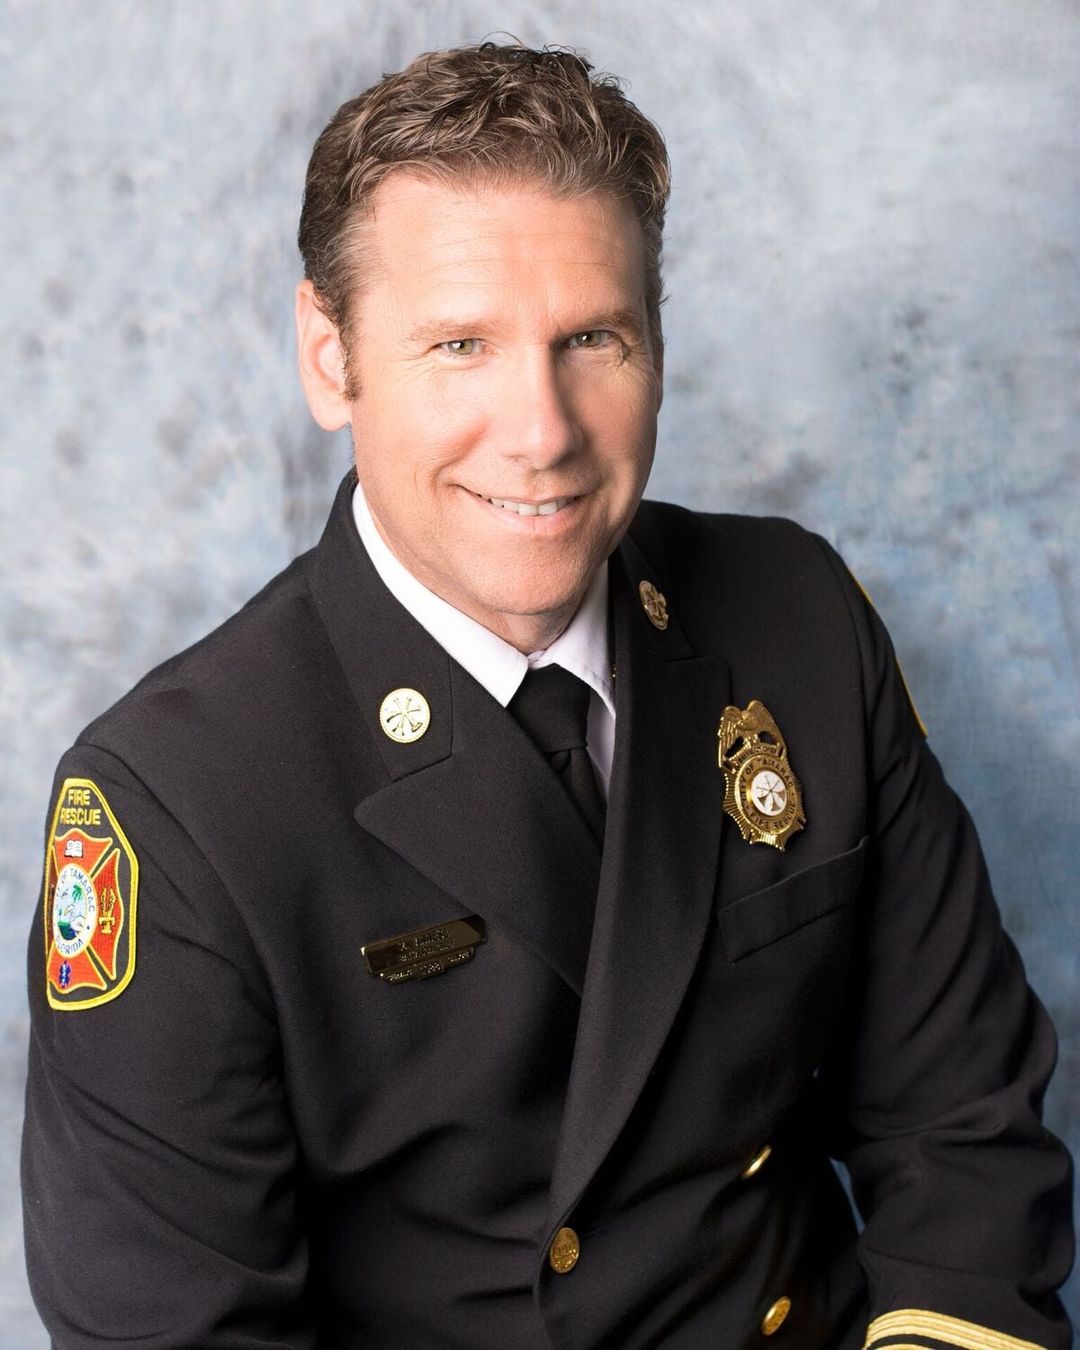 Fire Chief Michael Annese